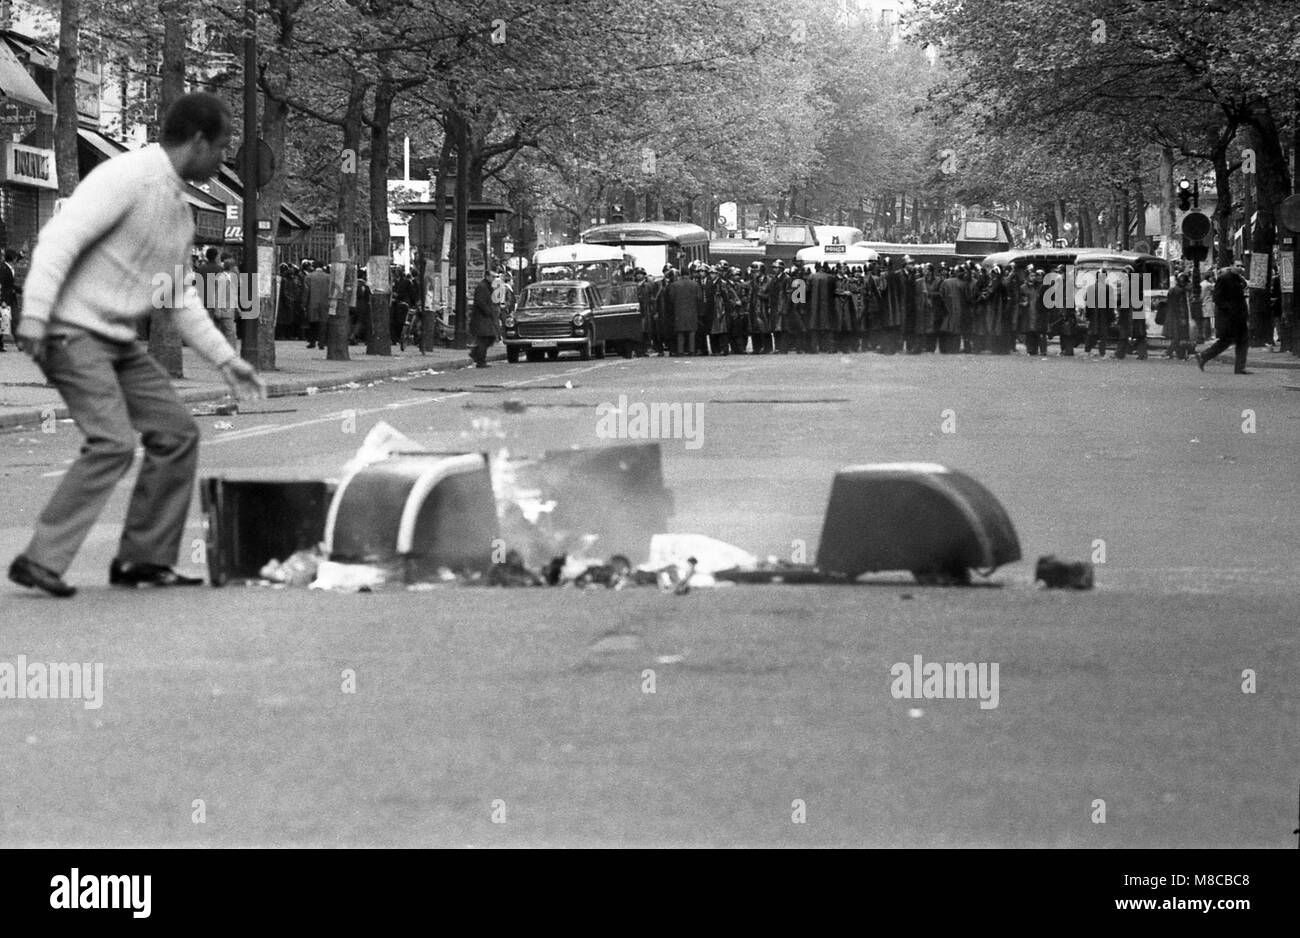 Philippe Gras / Le Pictorium -  May 68 -  1968  -  France / Ile-de-France (region) / Paris  -  Clashes between protesters and police Stock Photo